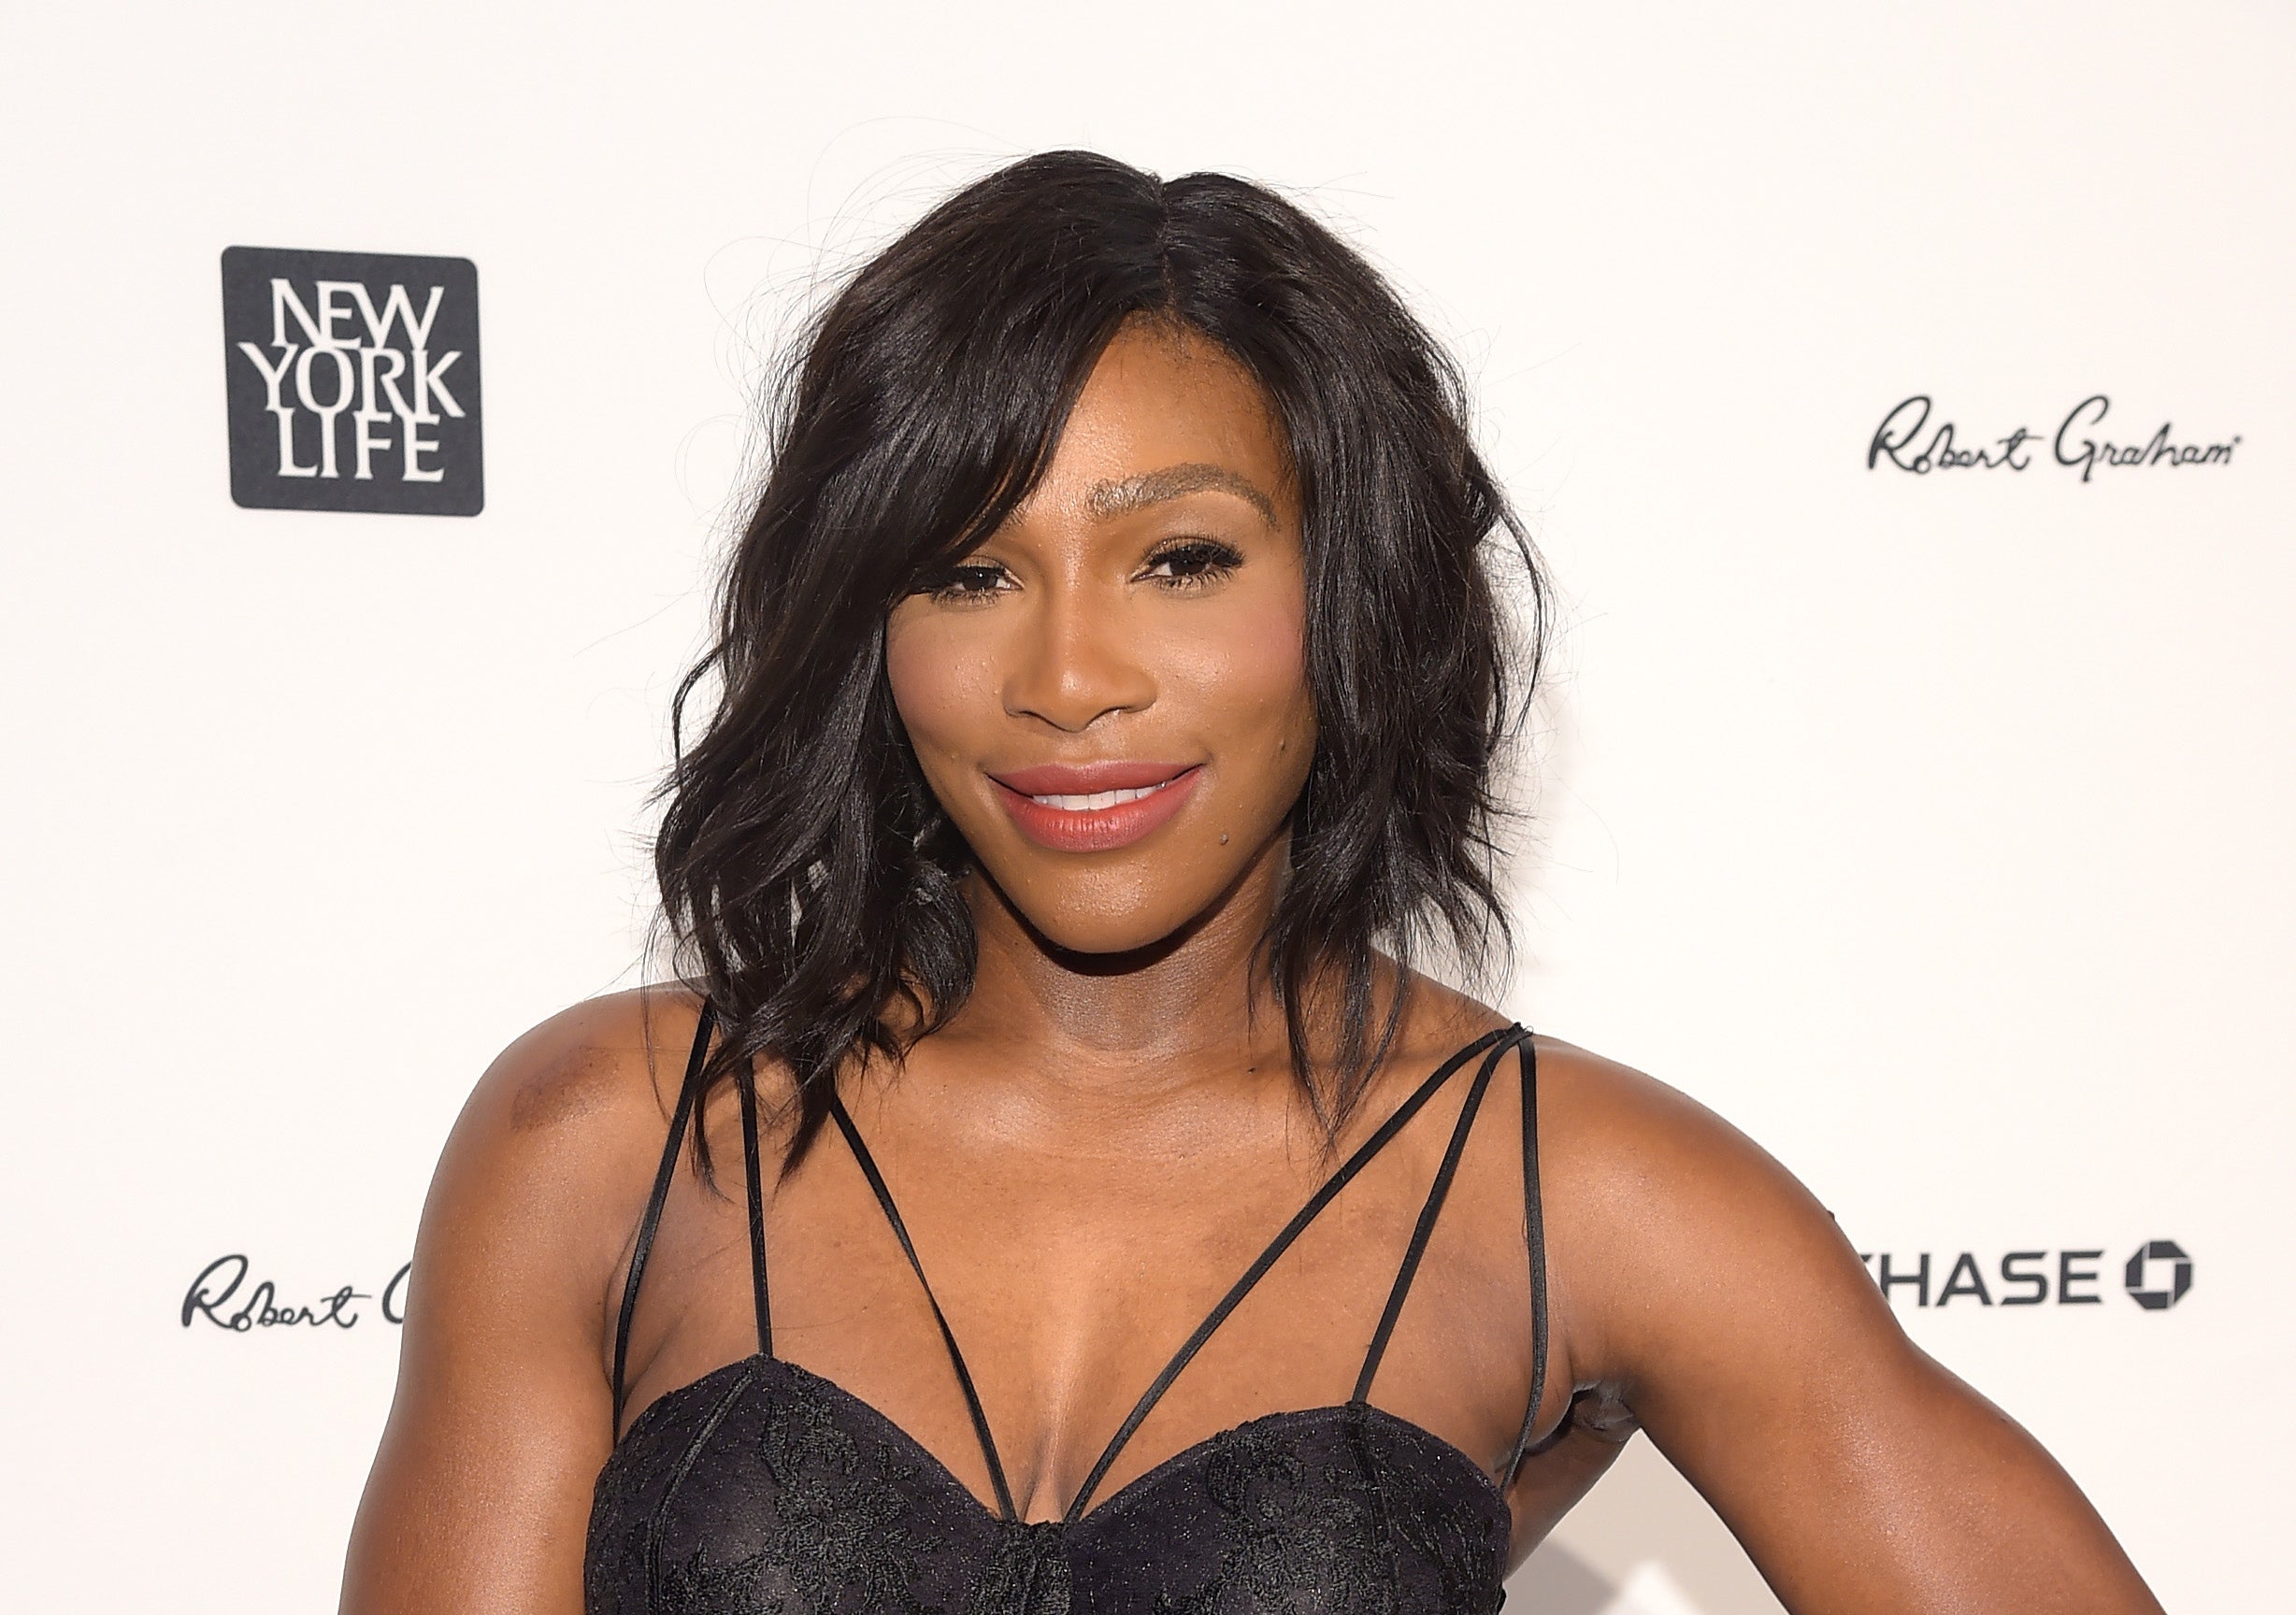 Serena Williams was named Female Athlete of the Year by the Associated Press for the fourth time.